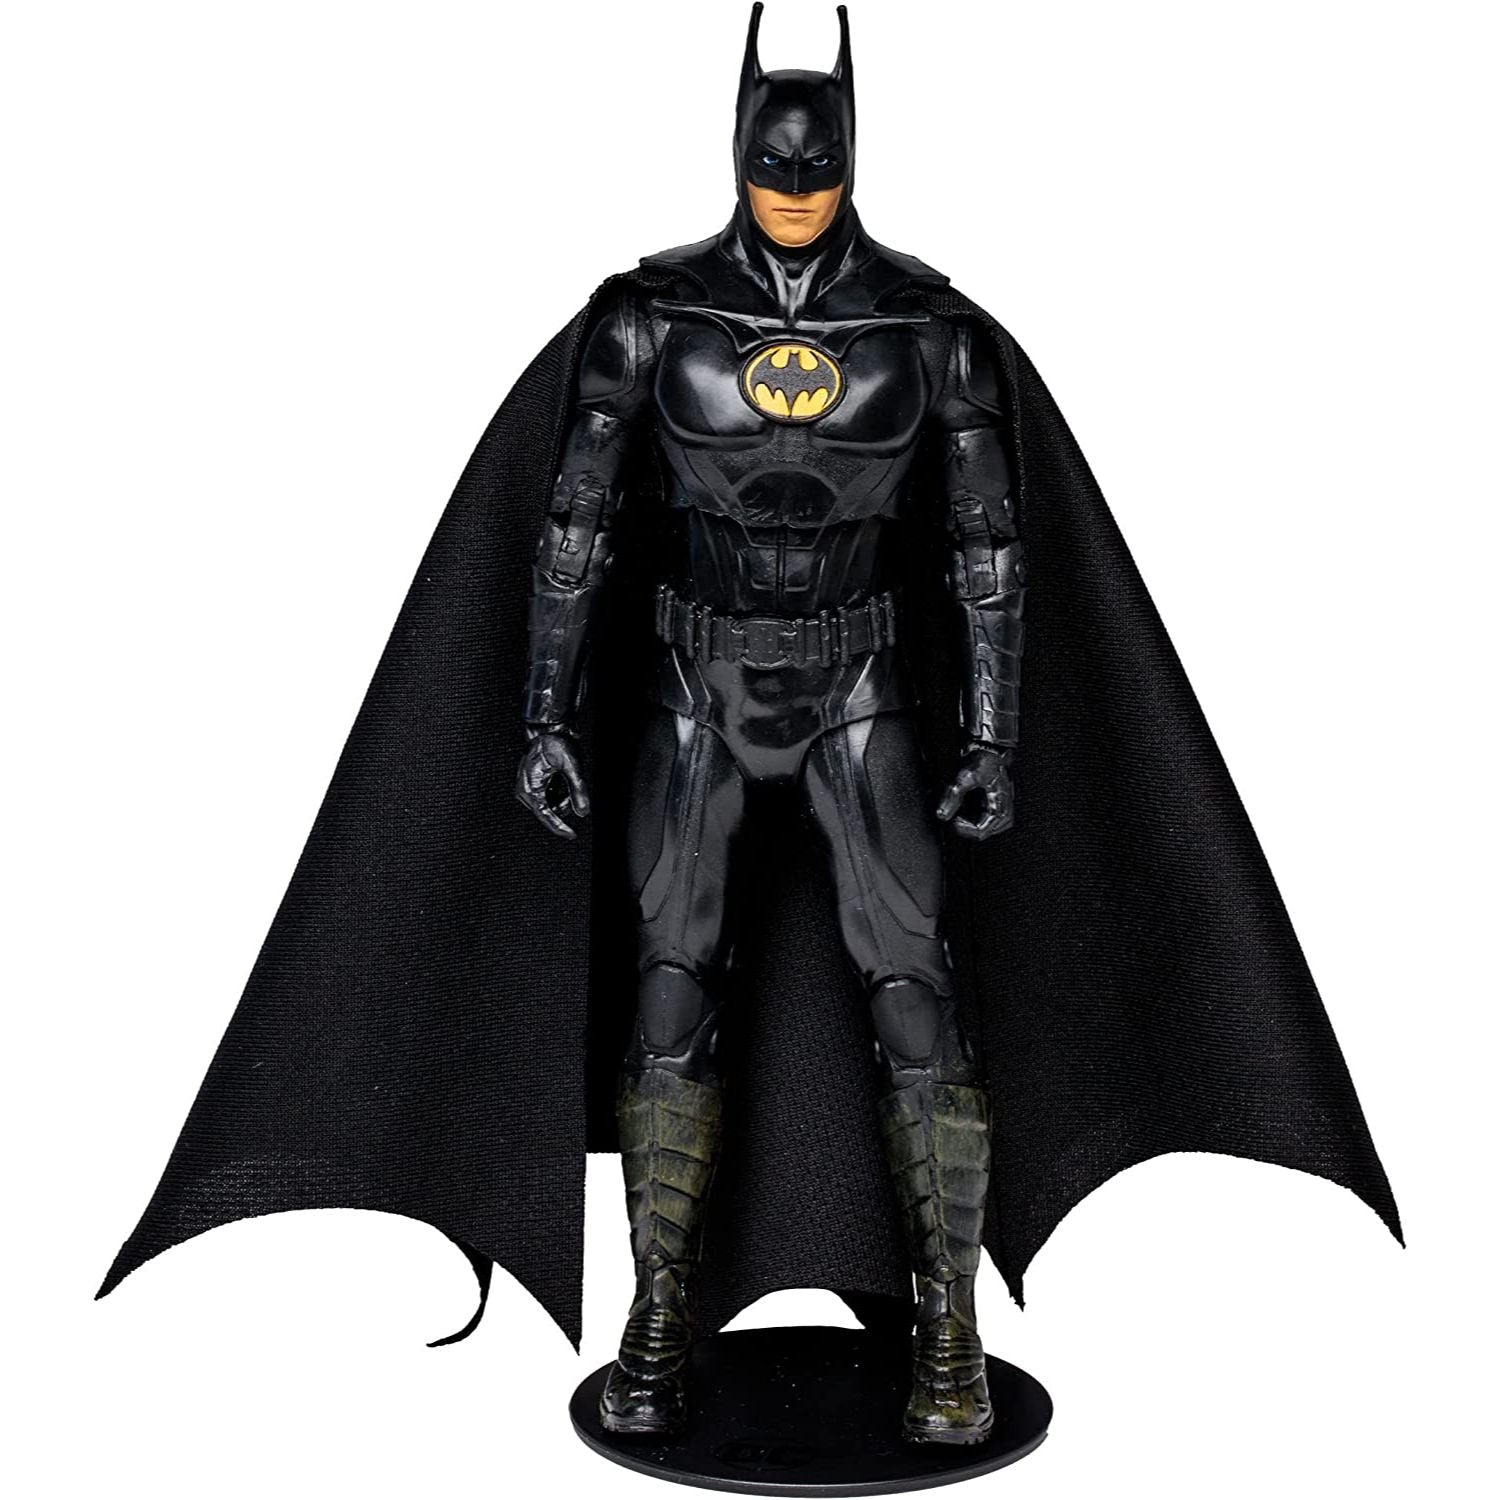 DC Multiverse - The Flash Movie - The Batman Action Figure Toy 7-Inch